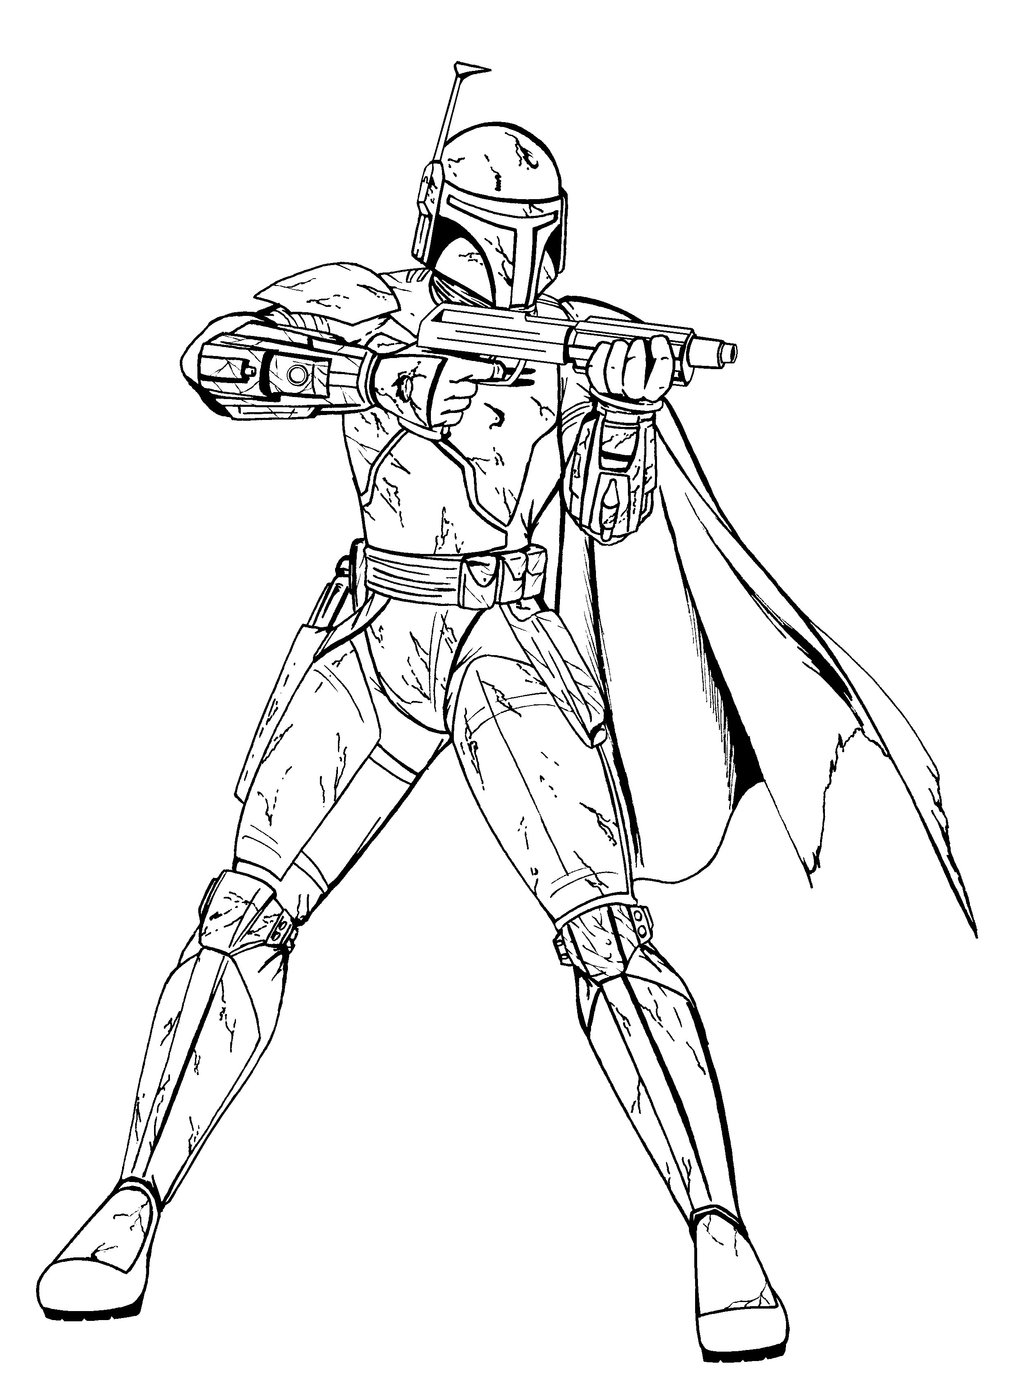 boba-fett-star-wars-kids-coloring-pages